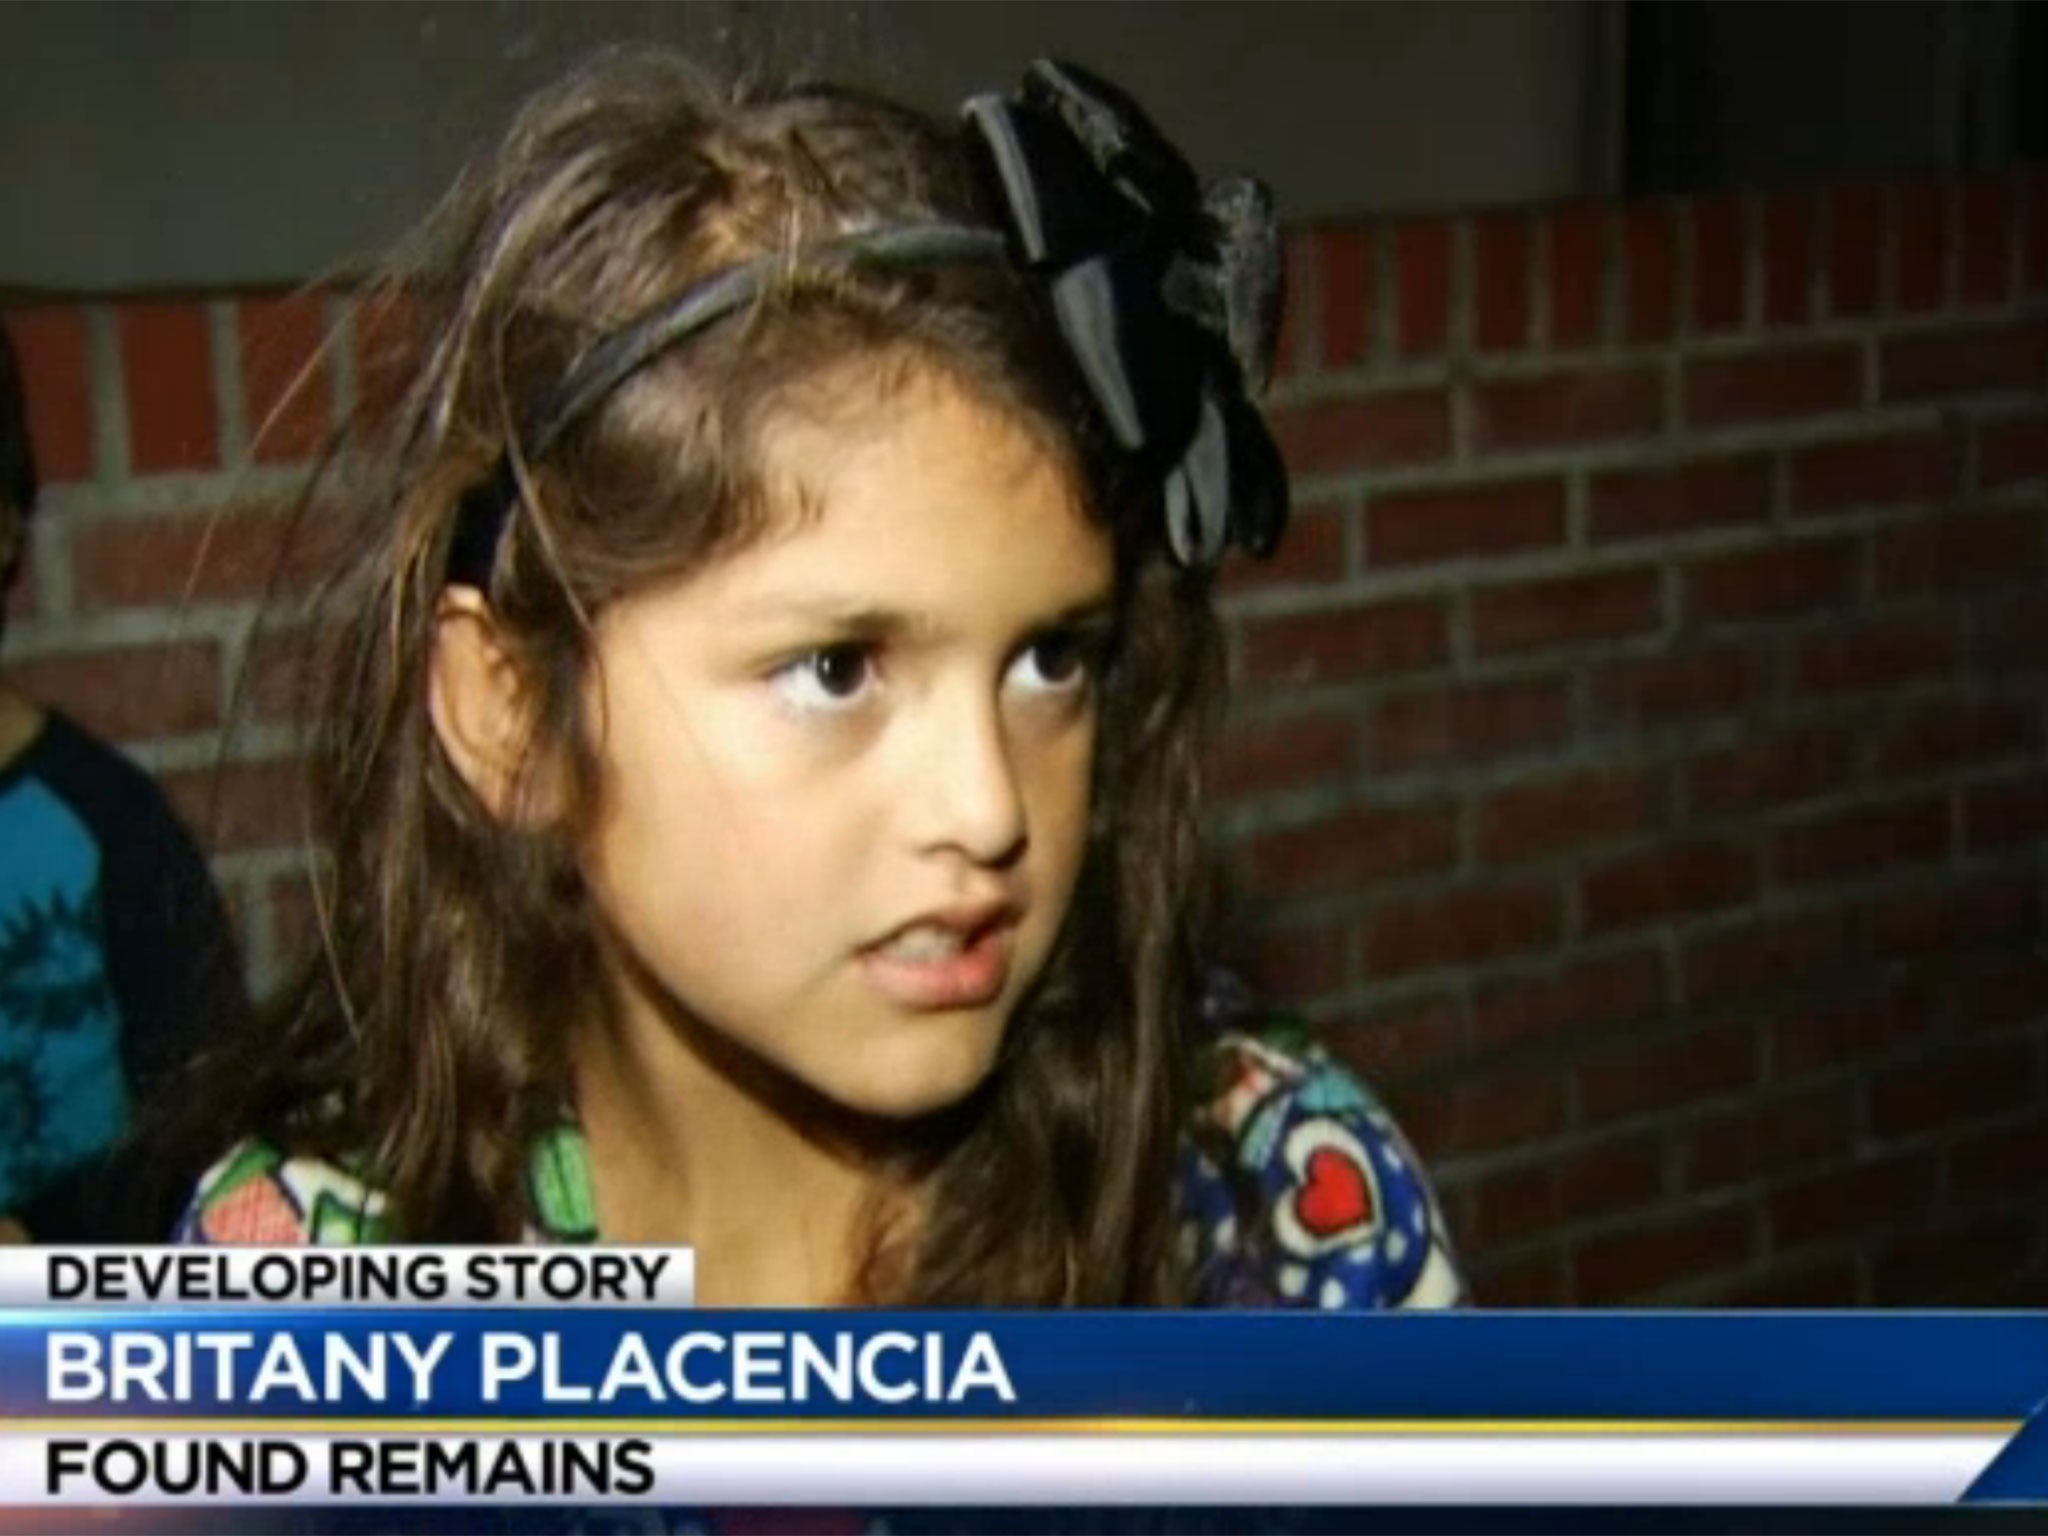 Britany Placencia is the nine-year-old girl who first discovered the baby's remains